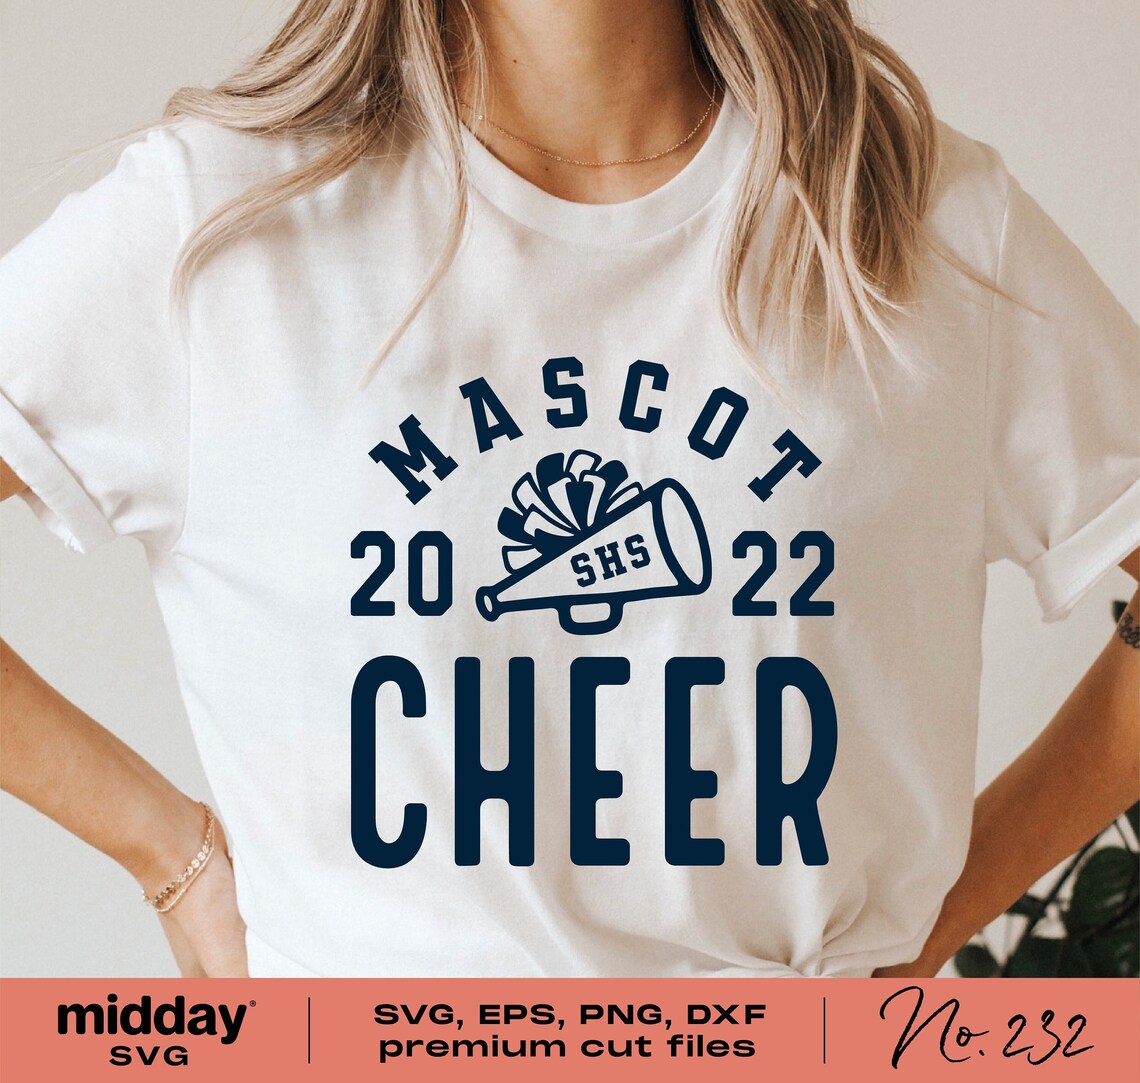 Cheer Team Template Svg Png Dxf Eps Cheerleader Team Shirts - Etsy